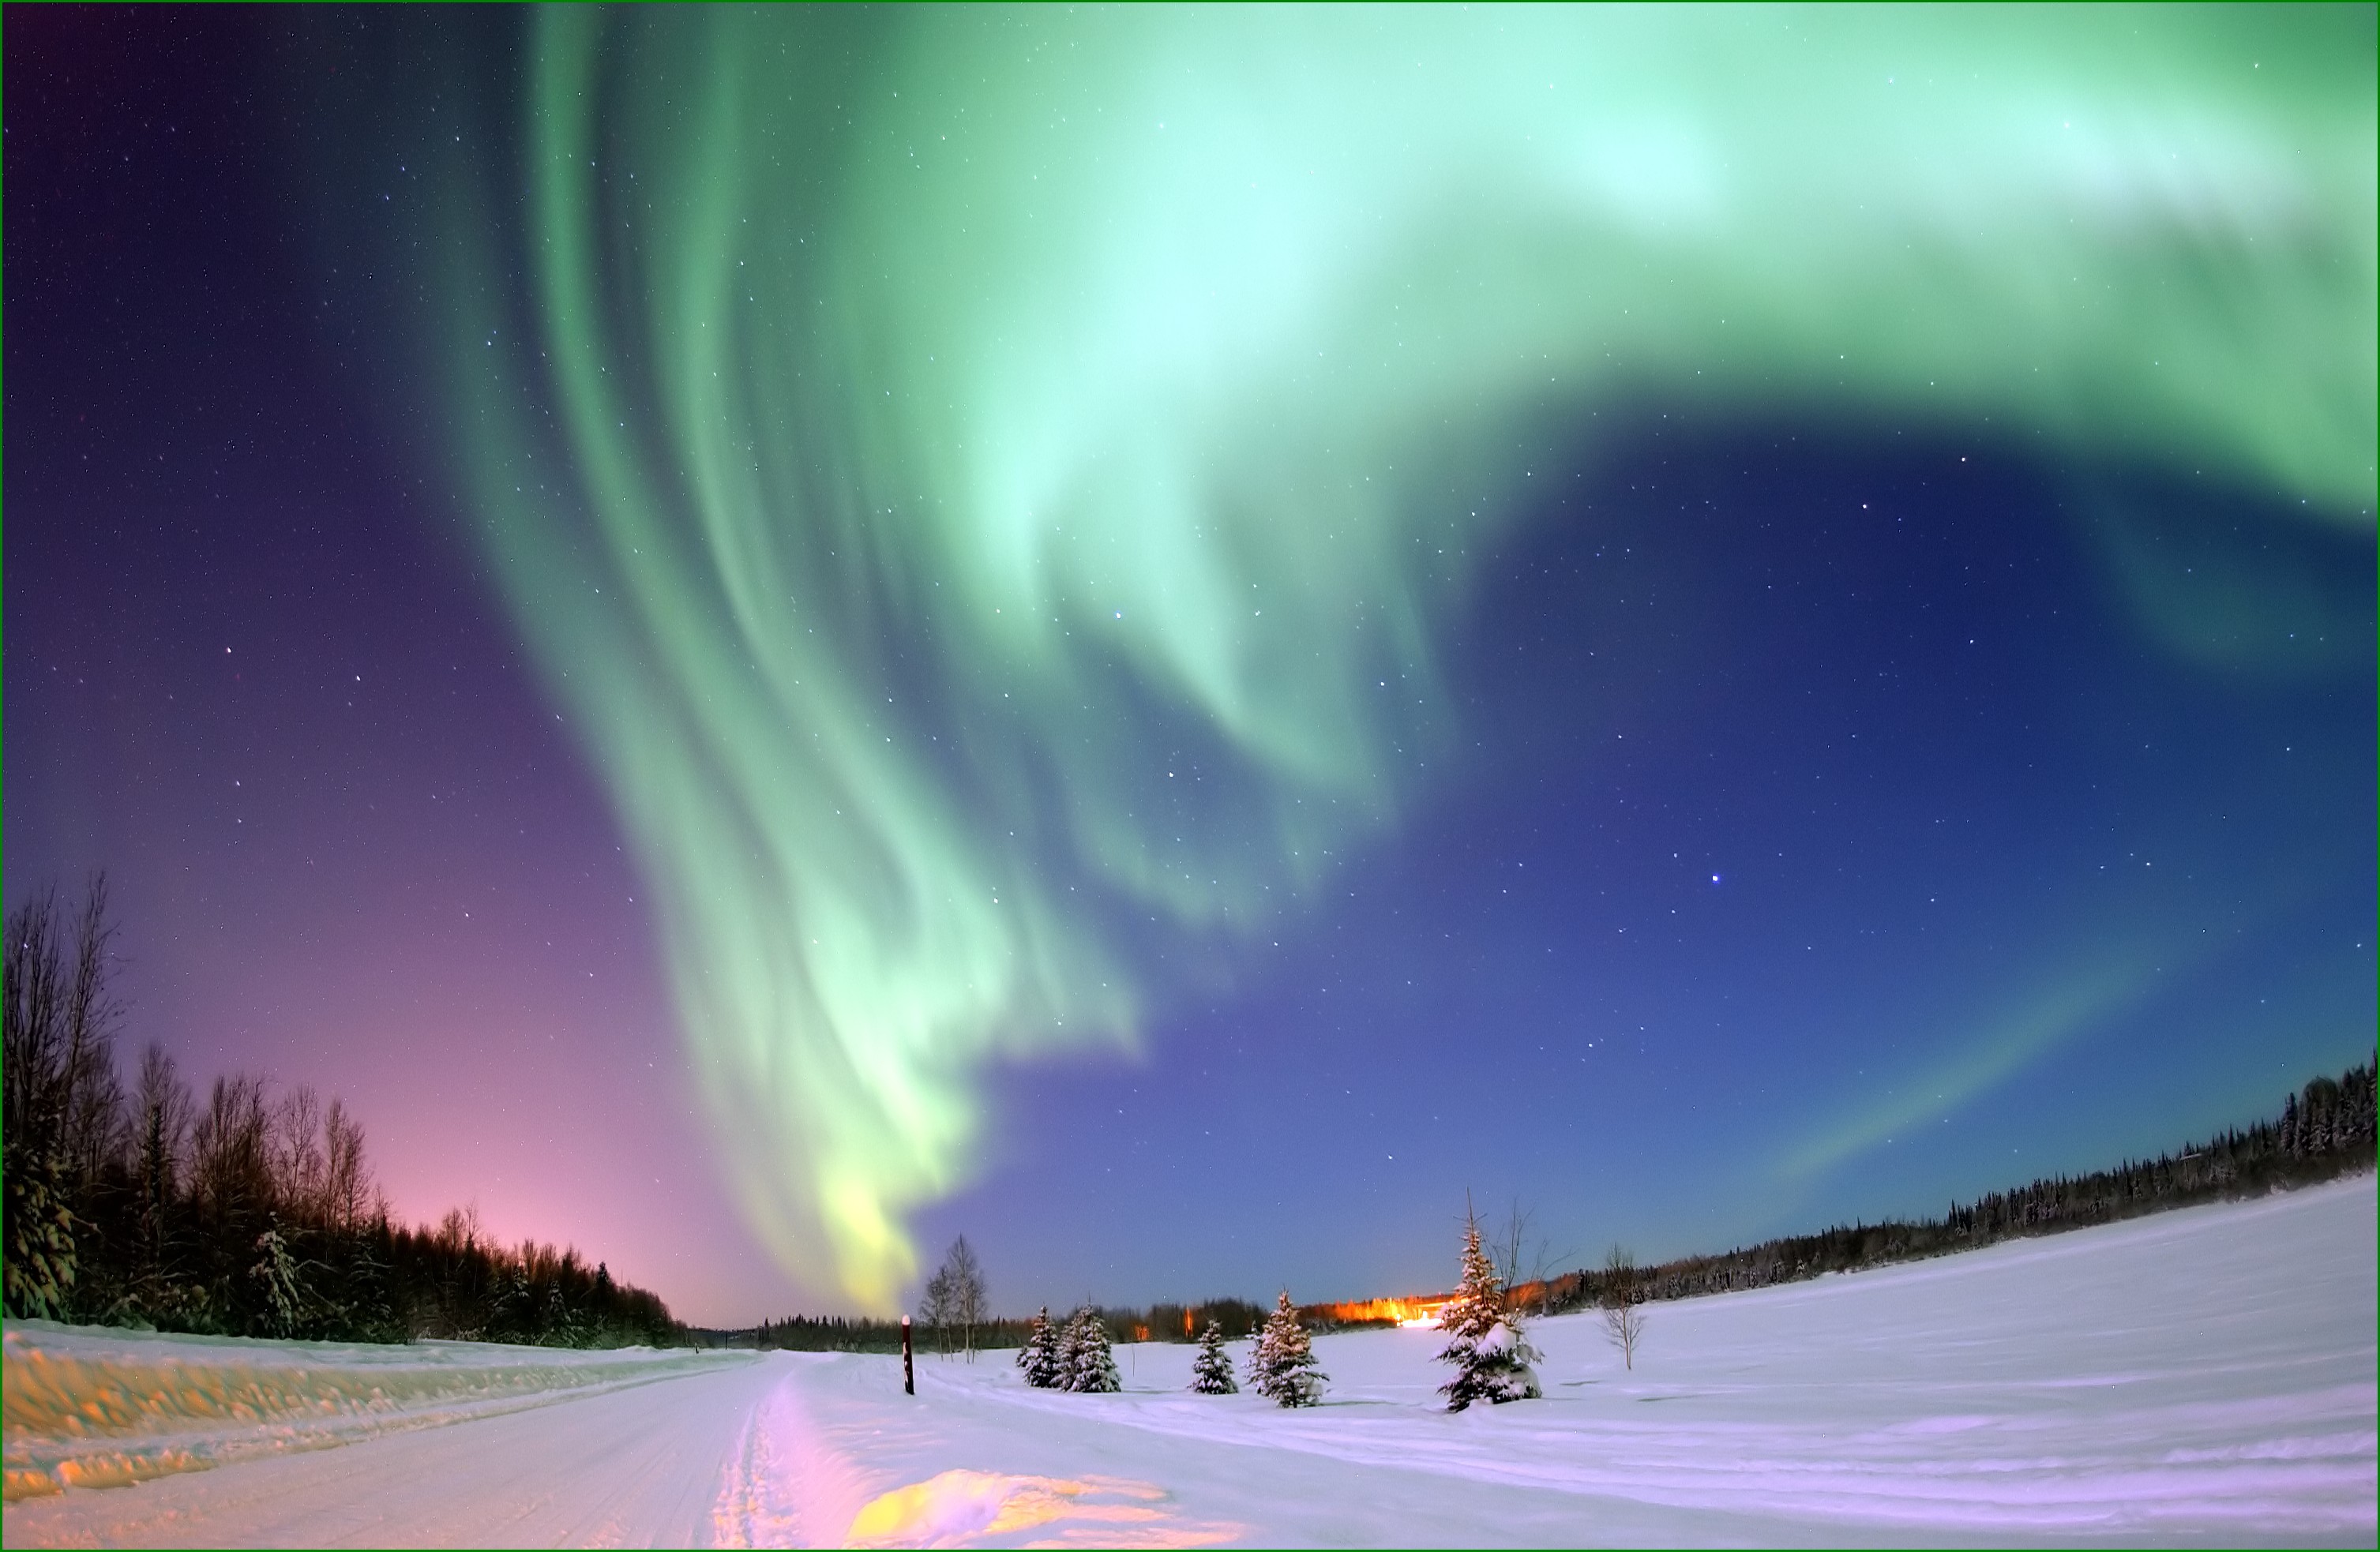 MYSTERY OF BIRTH Auroras DISCLOSED